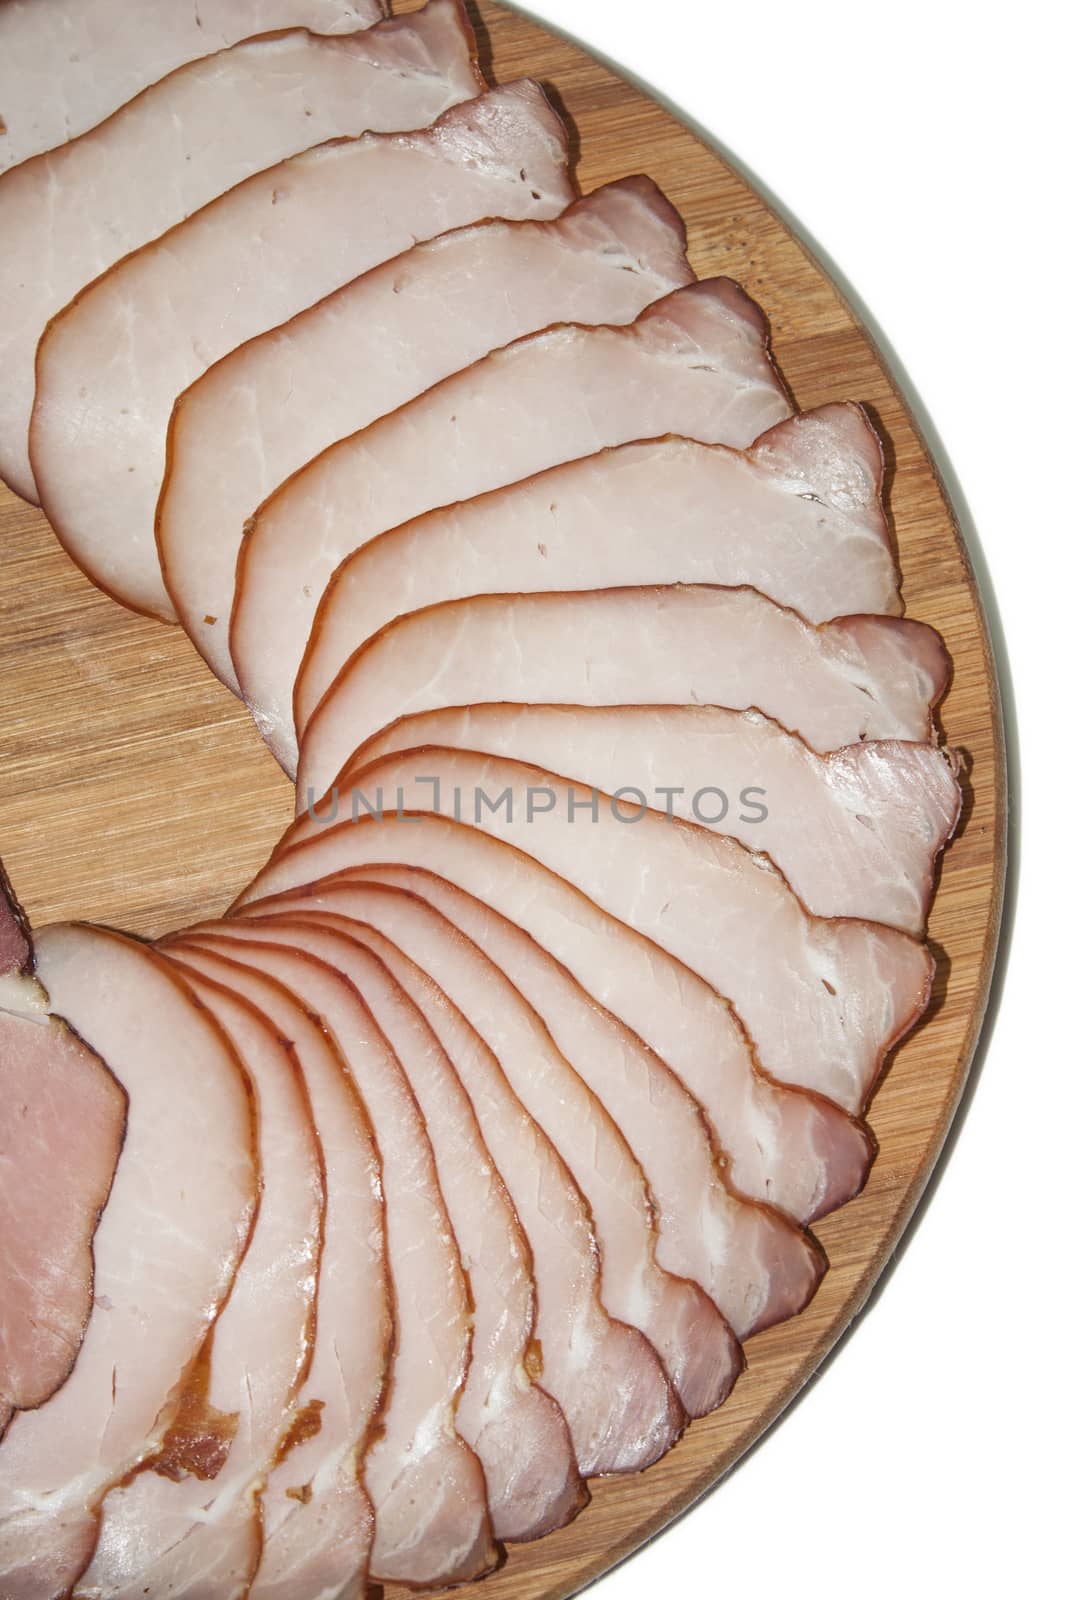 Cutted smoked sirloin on a wooden board by zlajaphoto